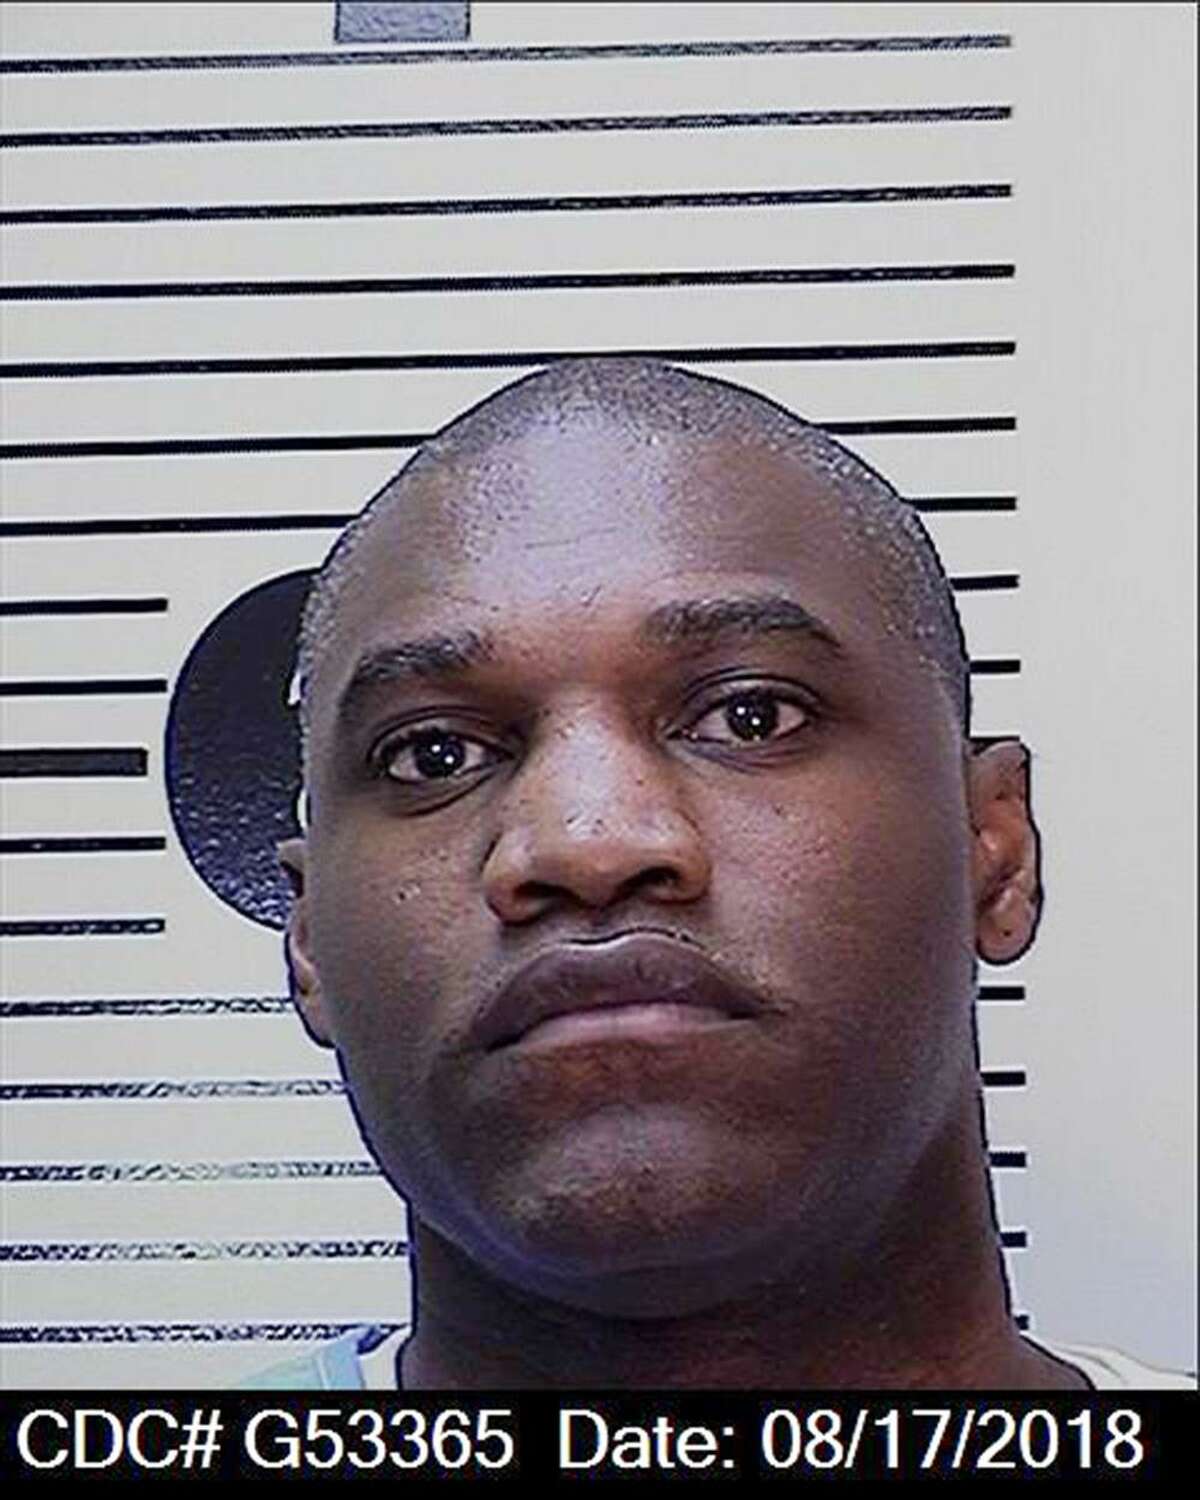 California Death Row inmate Donte McDaniel challenged the sentencing phase of death row court cases.